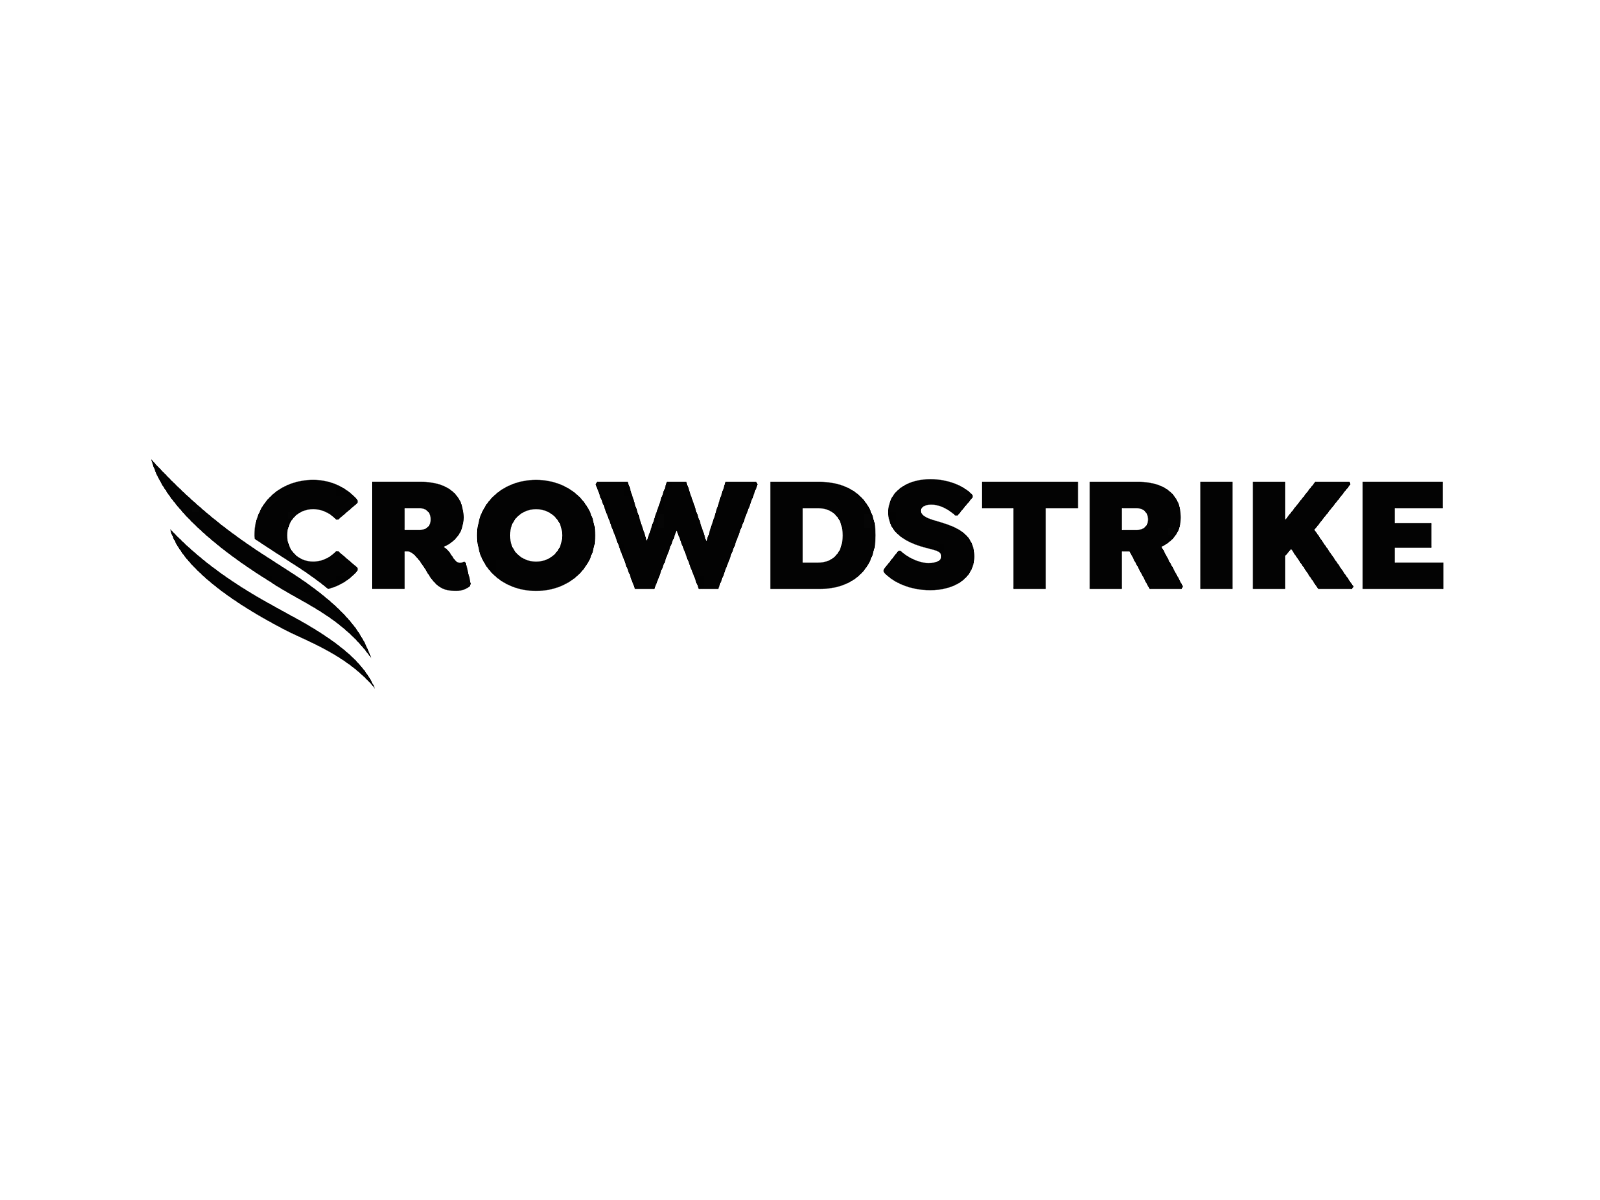 Crowdstrike is an adelsen client